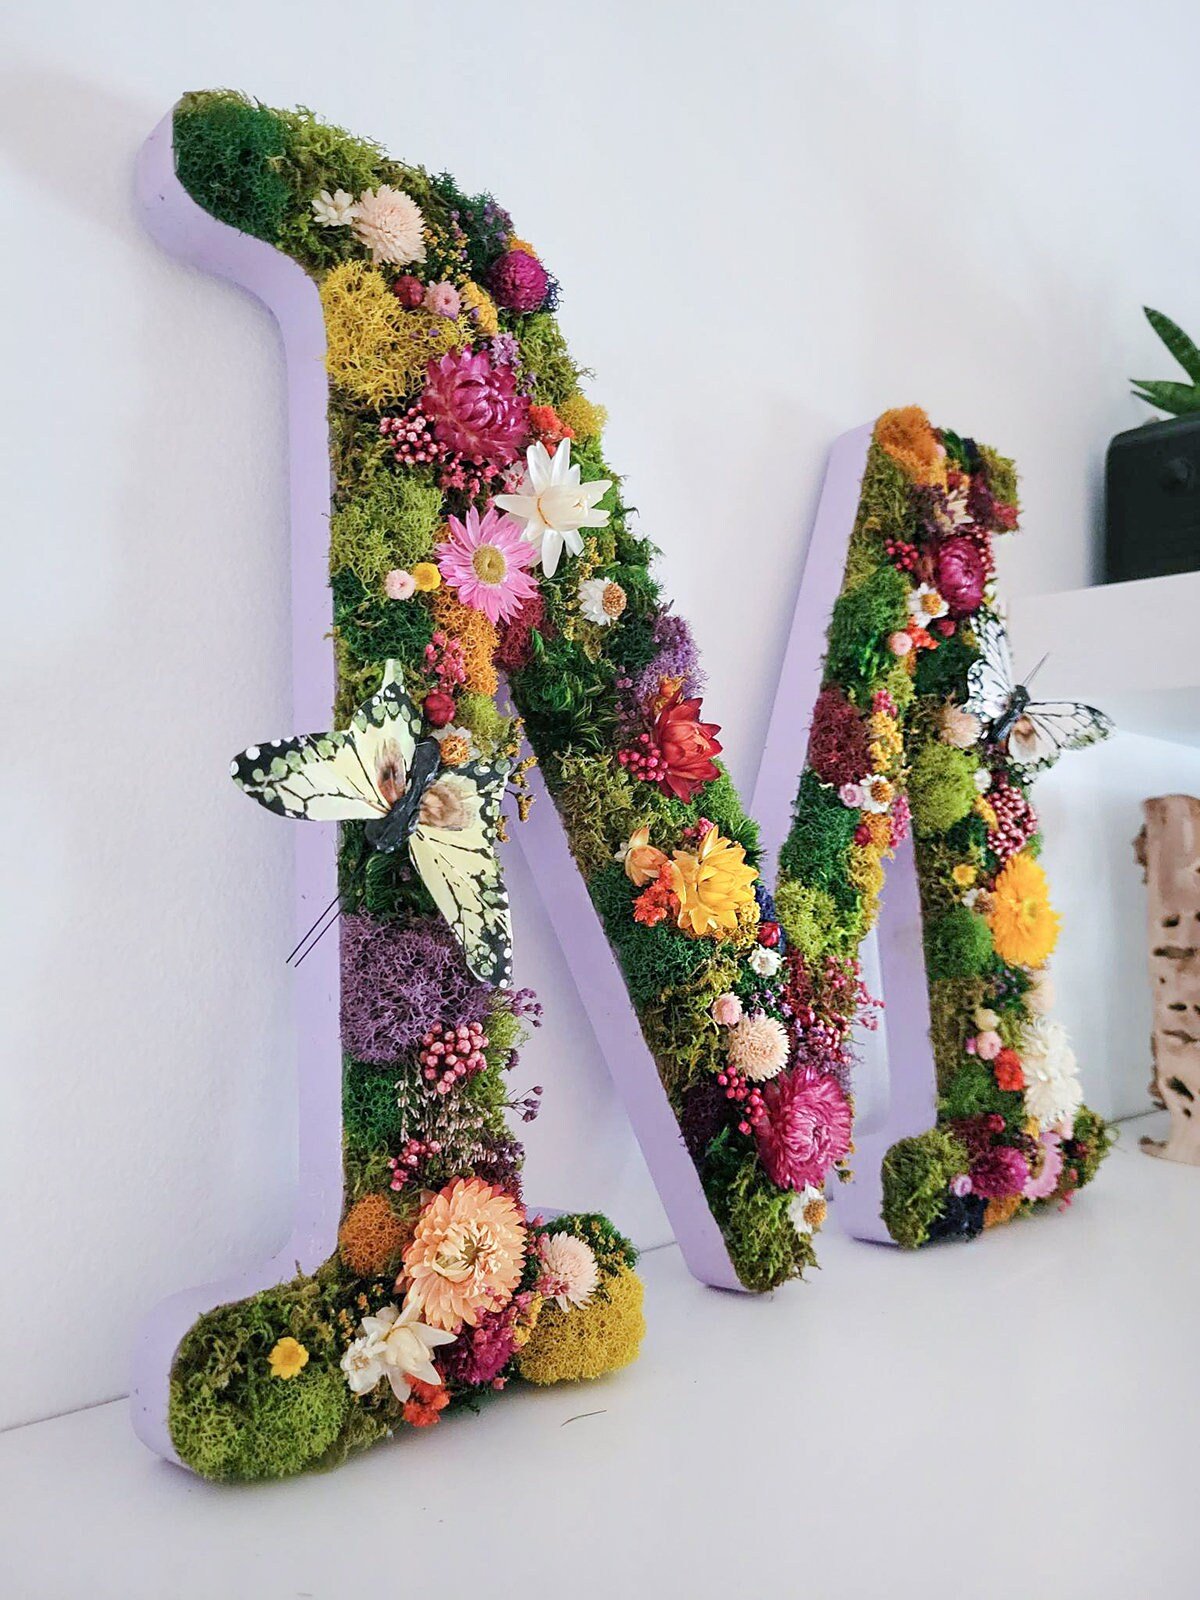 Preserved Moss Letters with flowers - Mossy Moss by Olia